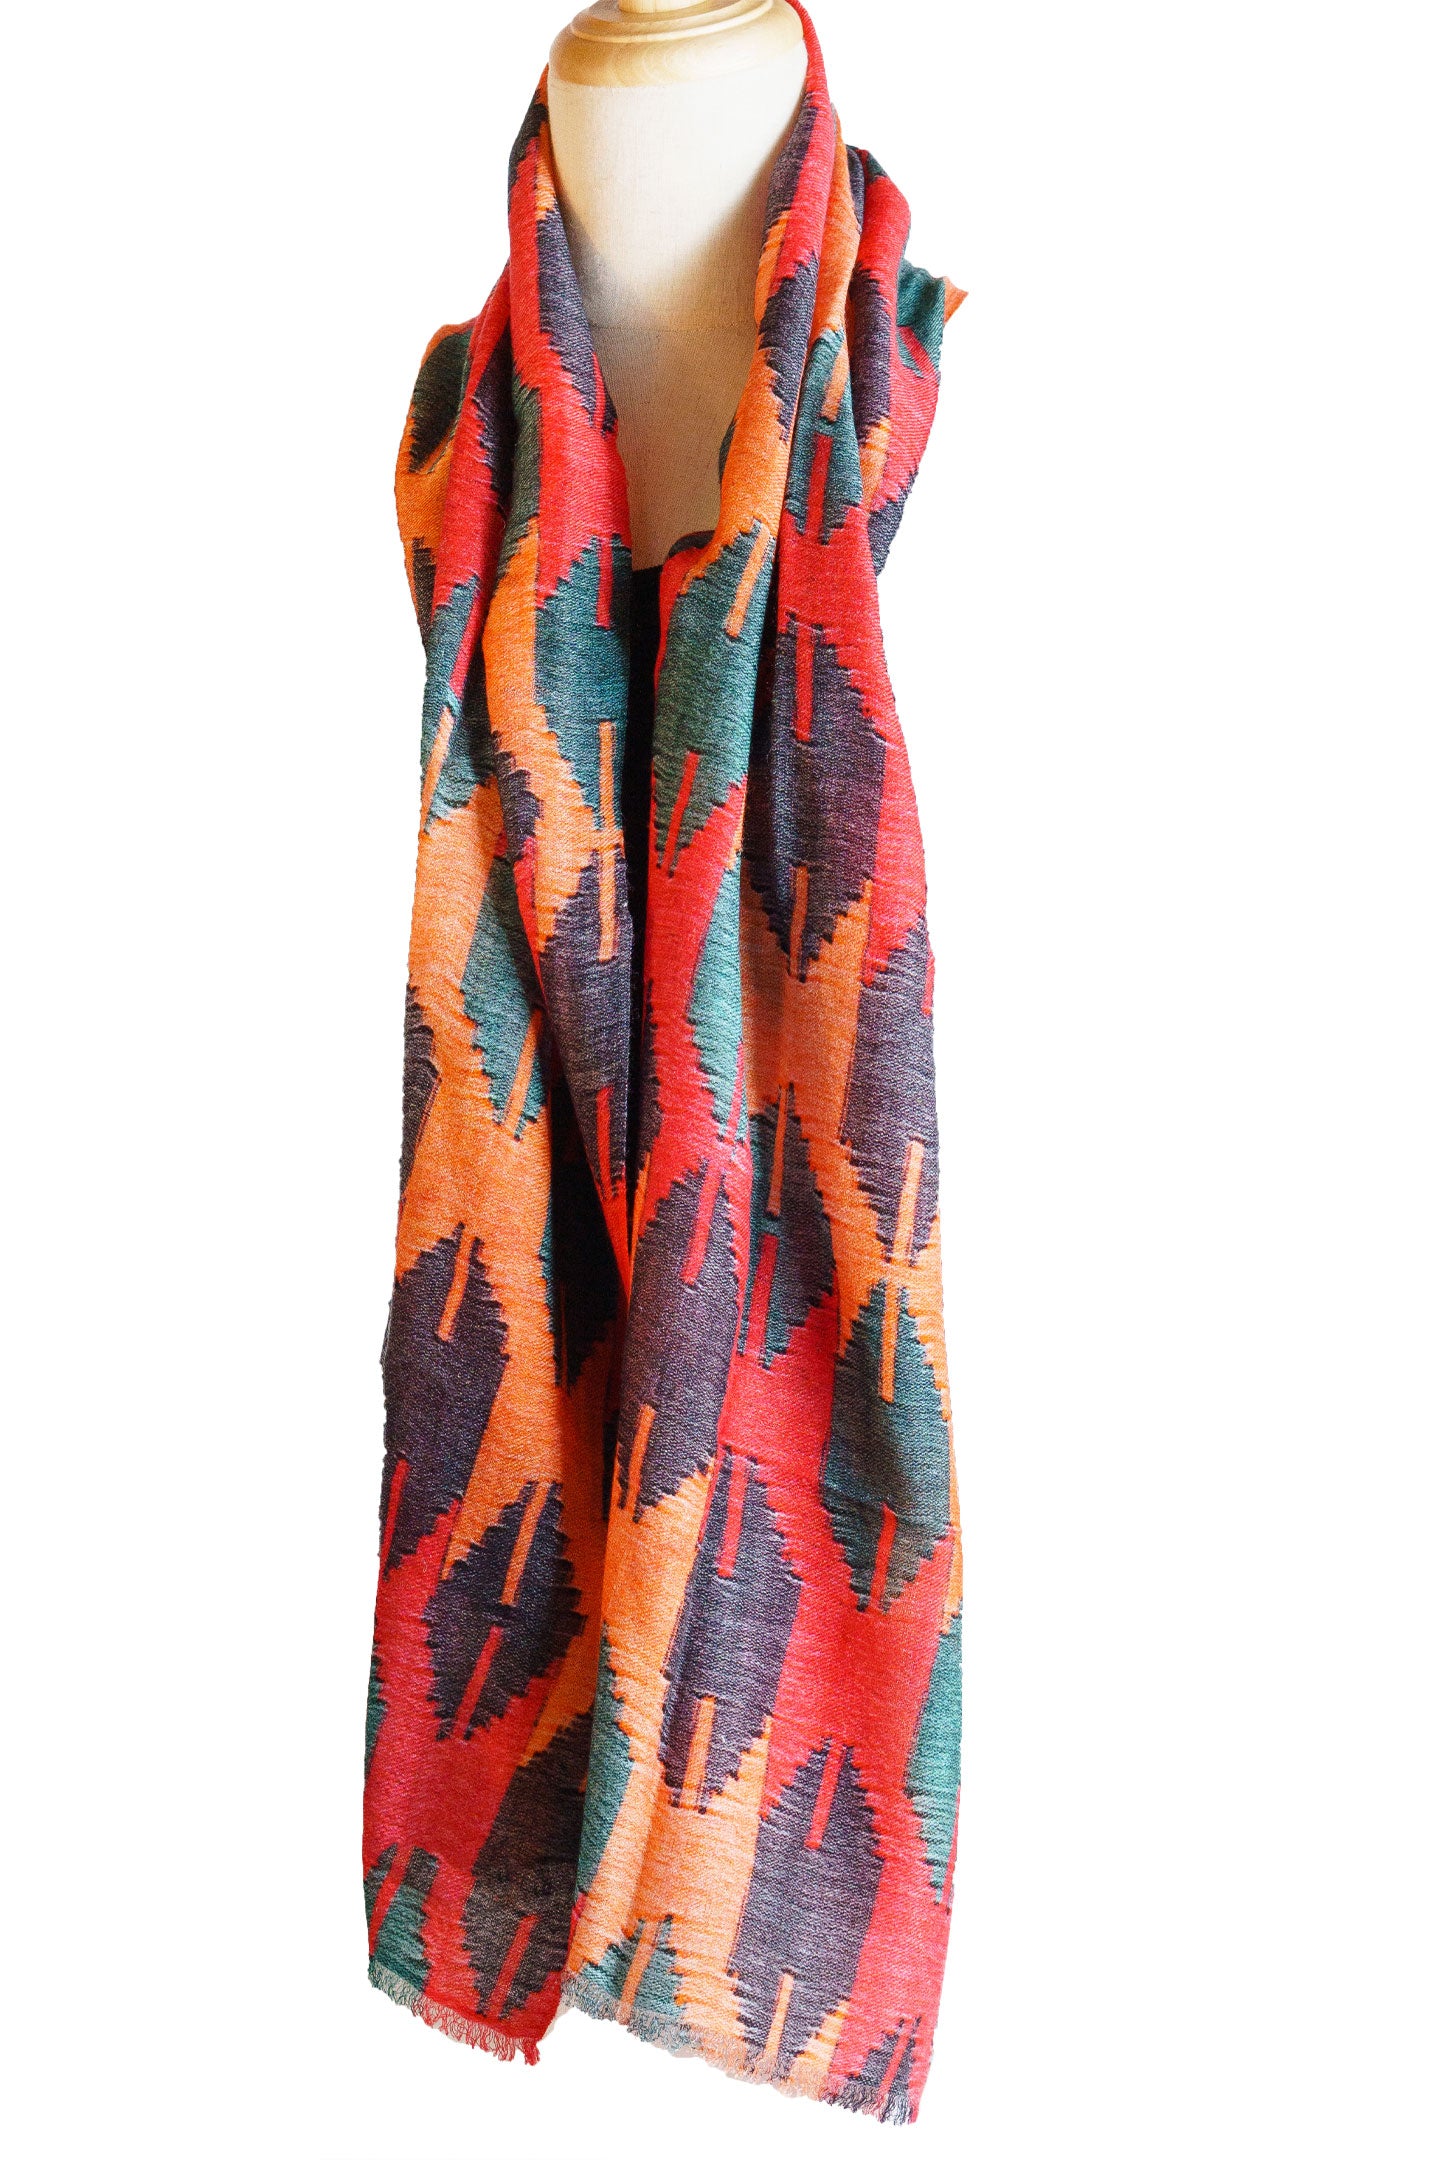 Pure Cashmere Shawl Wrap in Nepalese Dhaka Patterns